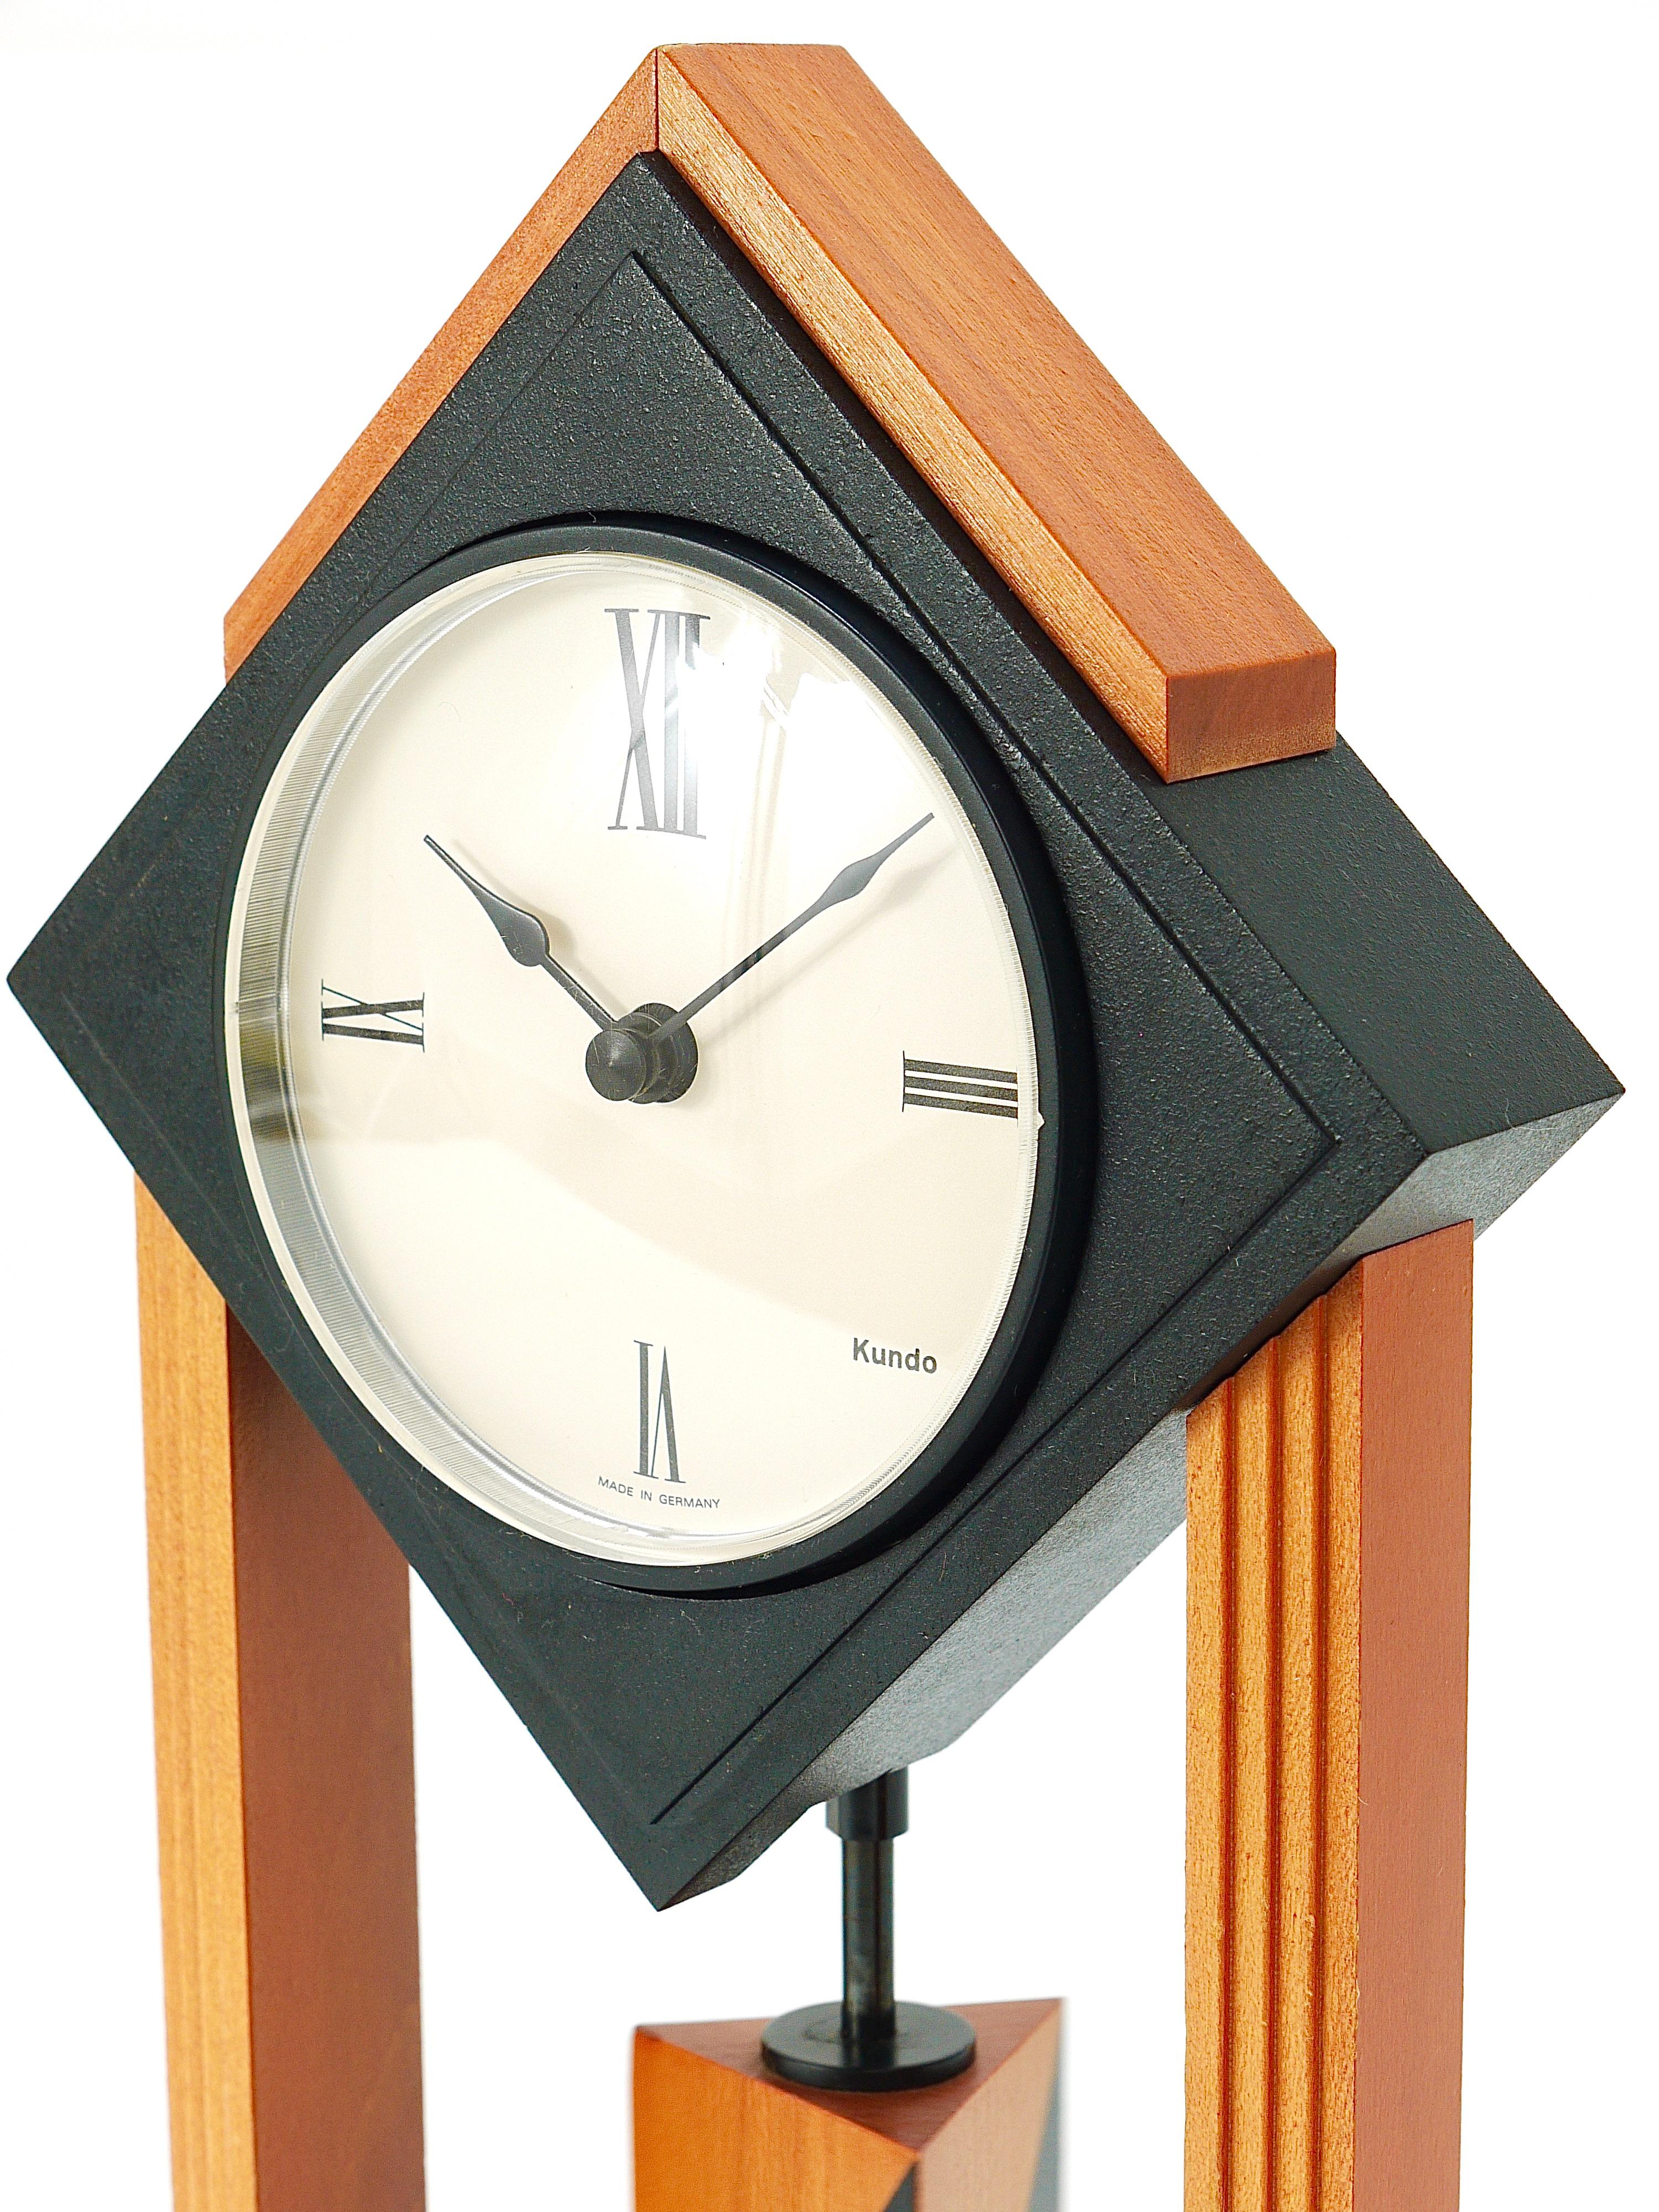 Postmodern Memphis Milano Style Torsion Pendulum Table Clock by Kundo Germany In Good Condition For Sale In Vienna, AT